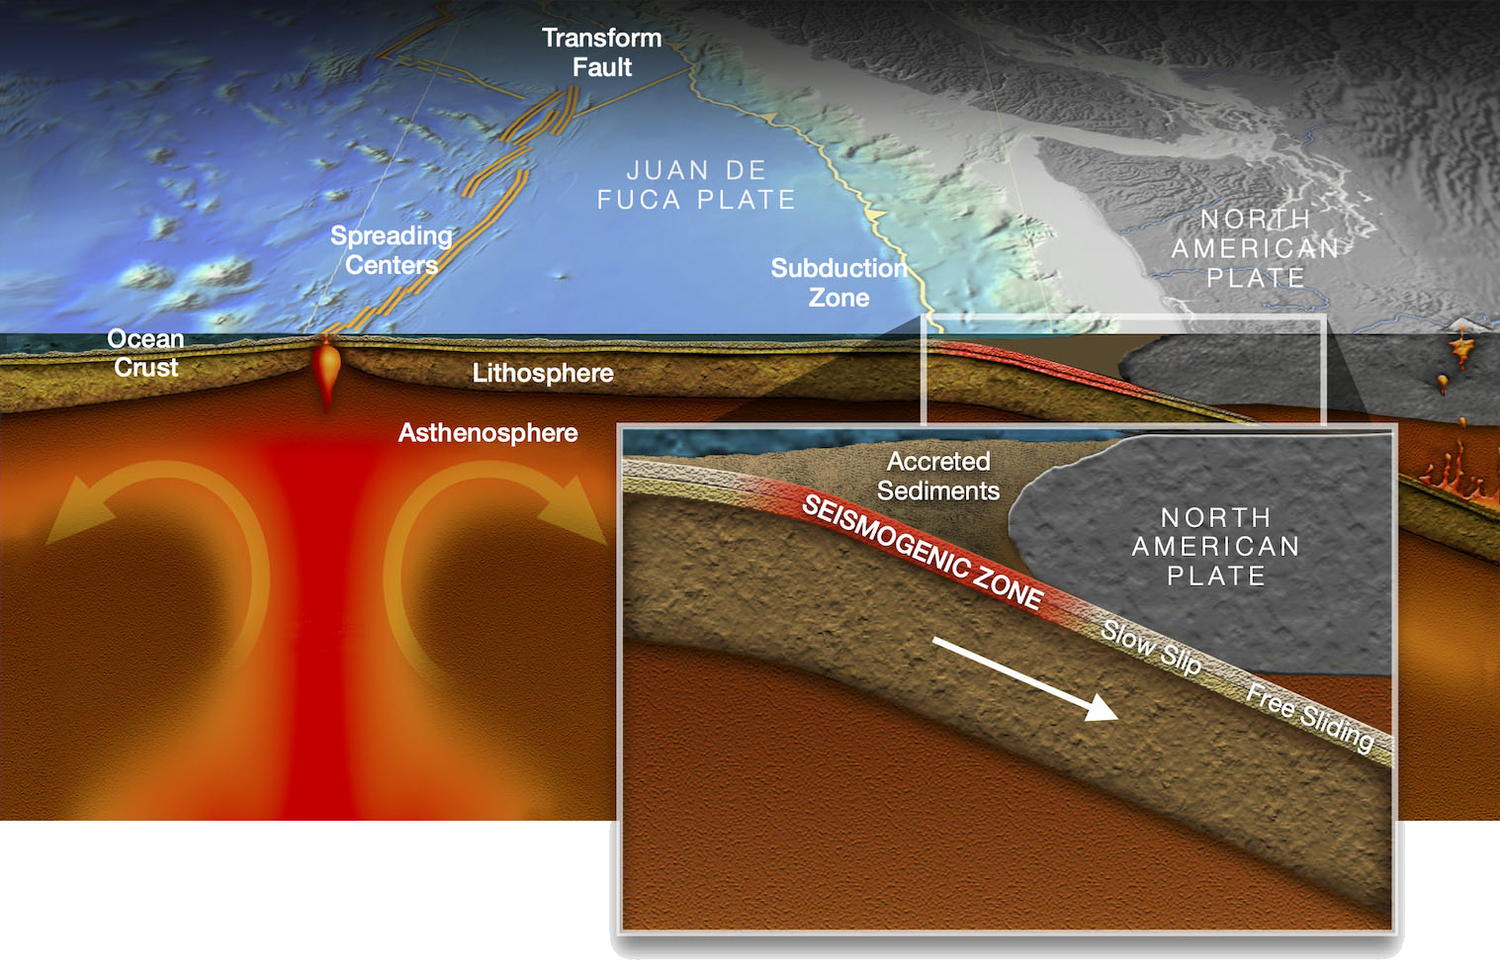 Subduction Zone with Blowout Full Width